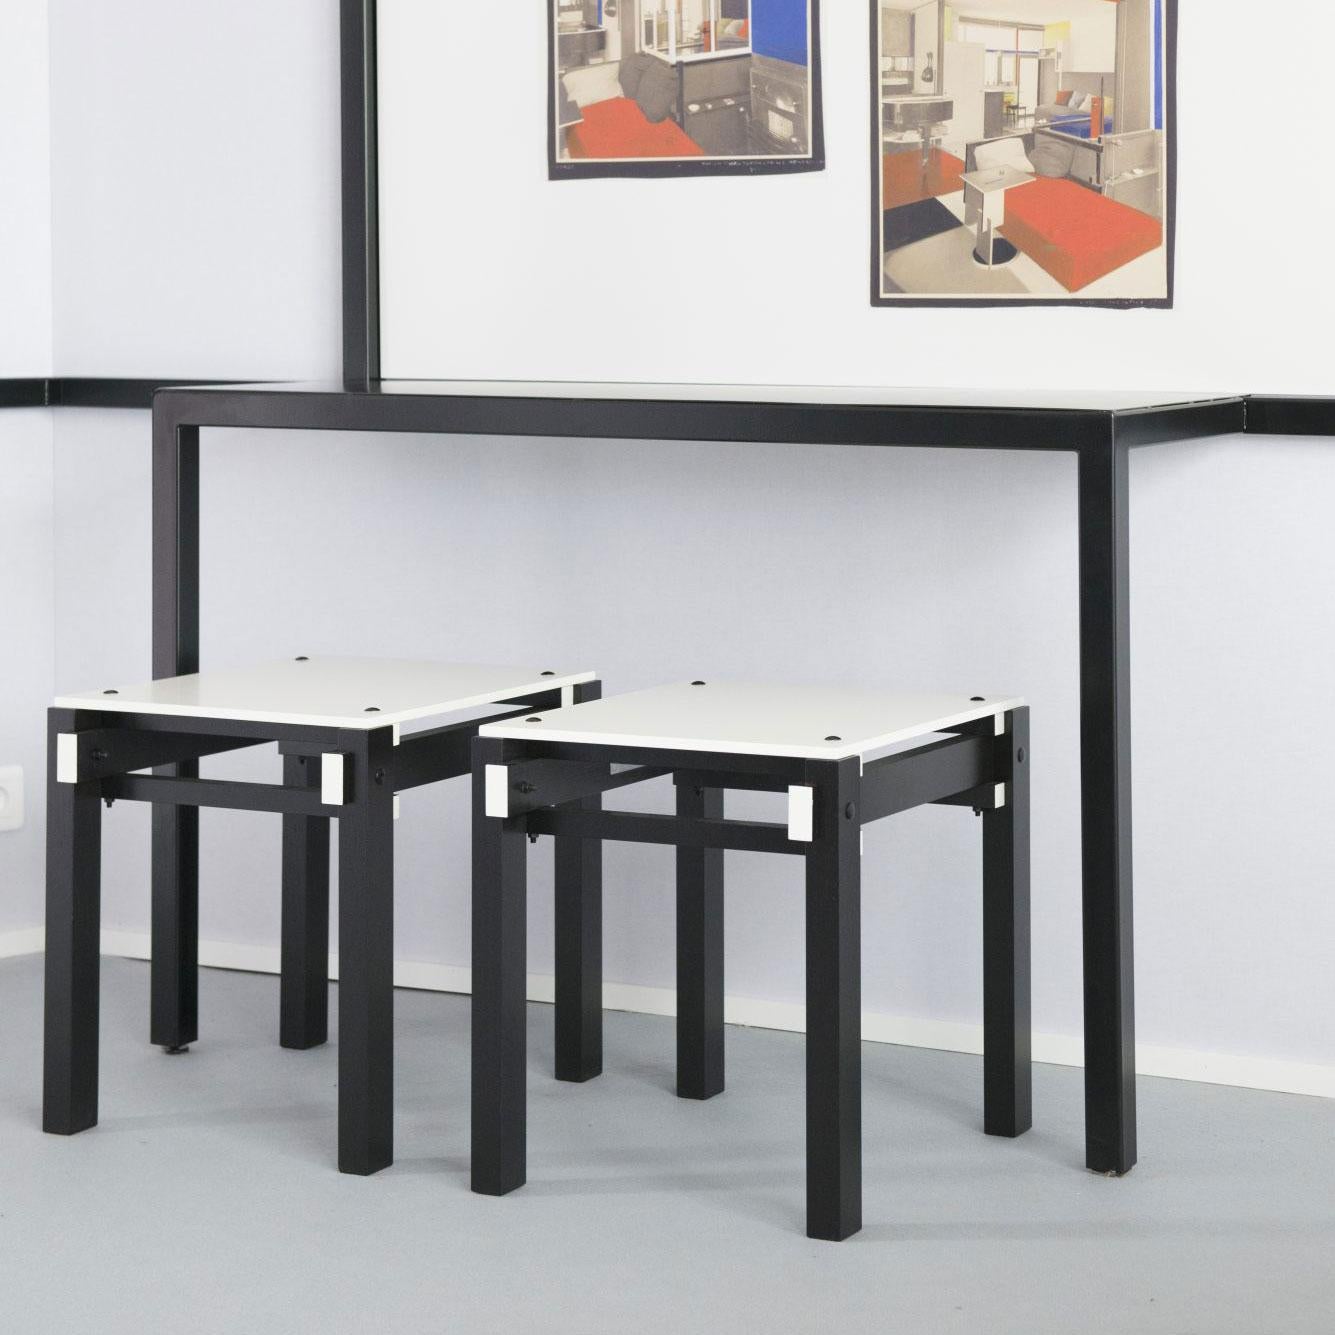 Dutch Military Stool in Black and White, De Stijl, Designed in 1923 by Gerrit Rietveld For Sale